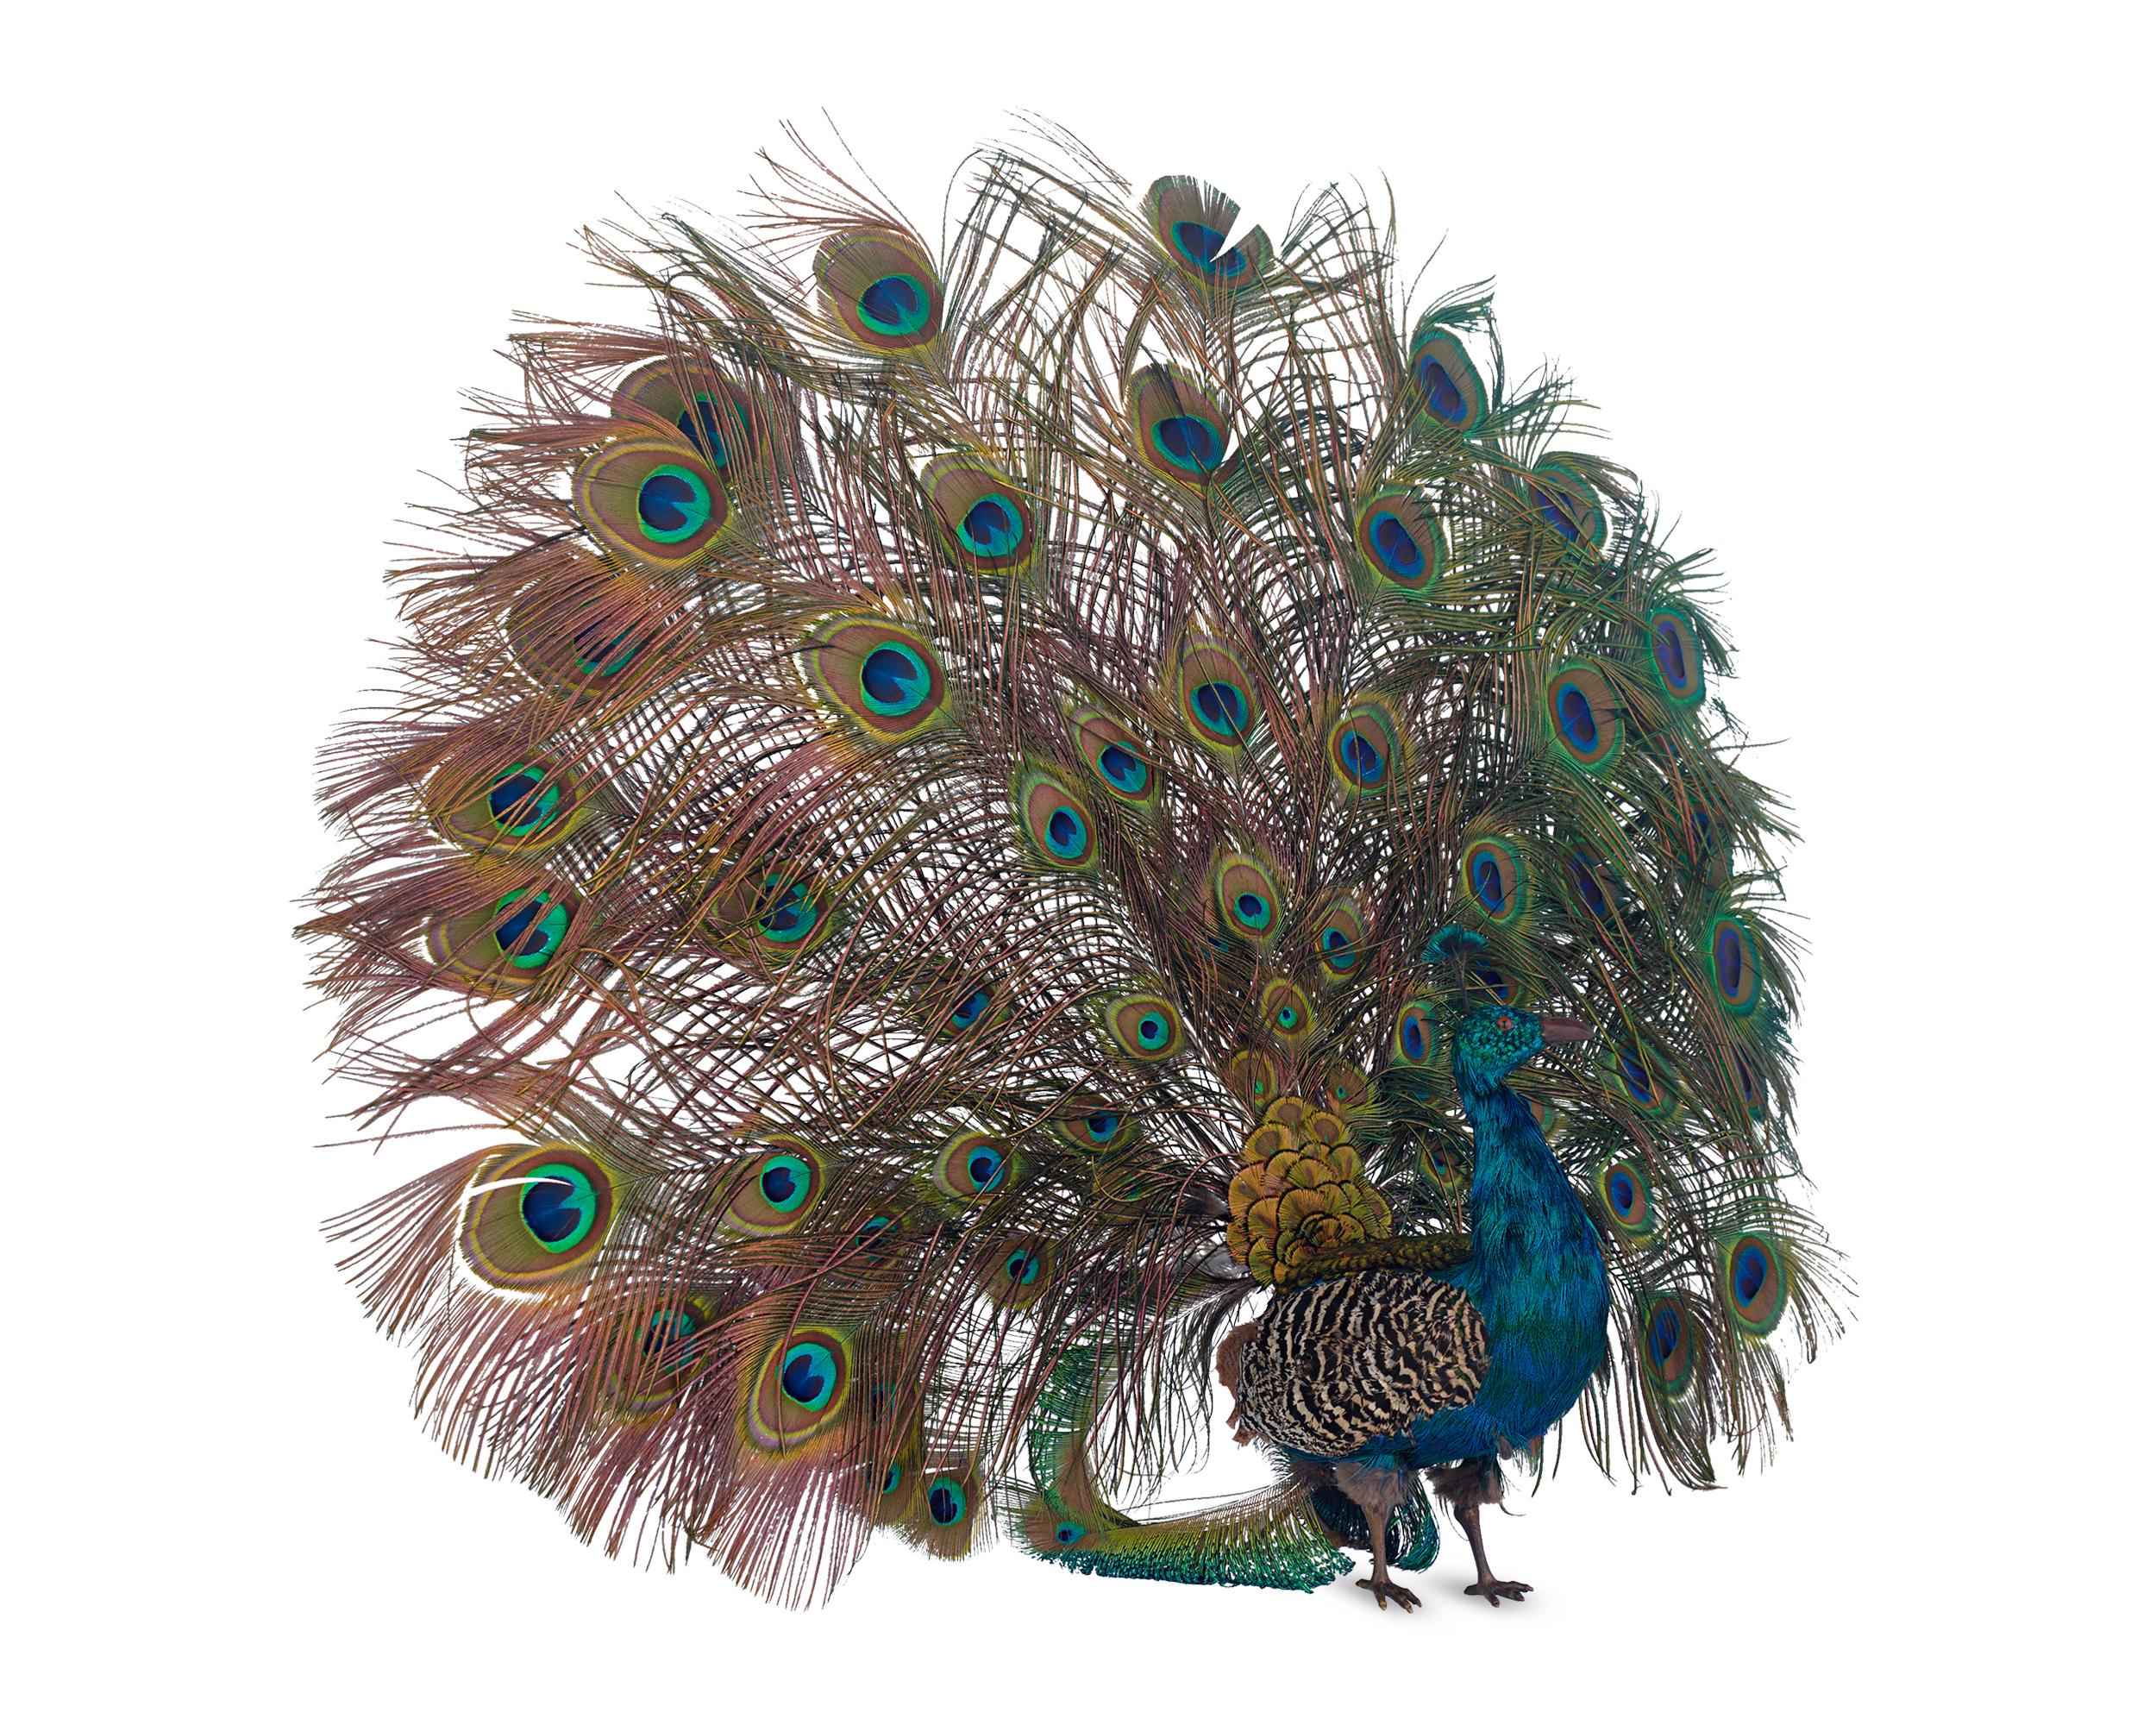 This spellbinding peacock automaton is attributed to the French toy-making company Roullet et Decamps. Its papier-mâché body contains a highly elaborate clockwork system that allows this handsome bird to come fully to life. When wound and released,